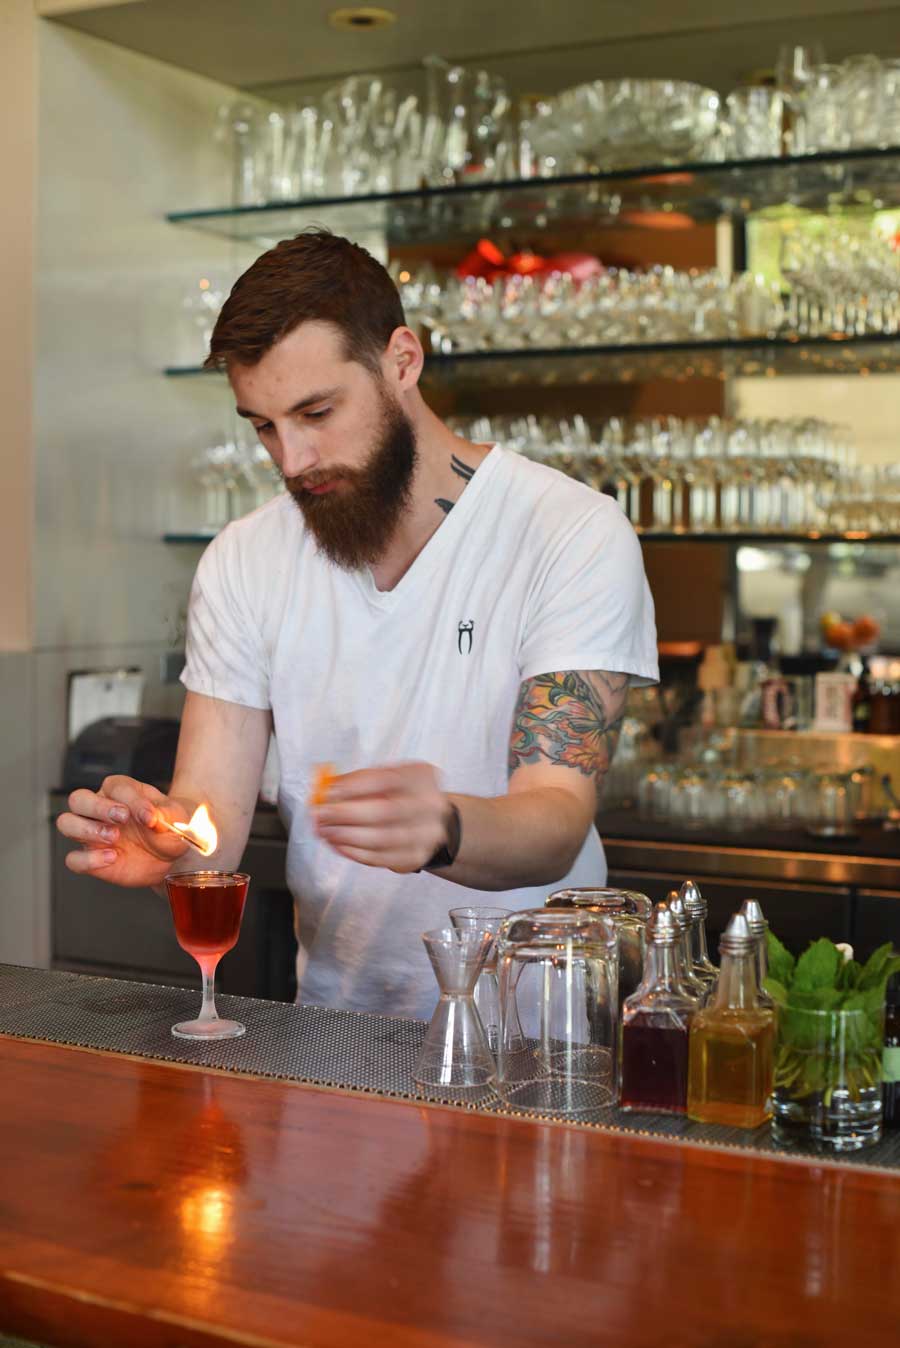 A cocktail drink created with fire, named 'The Wiggle' after the bike path near the restaurant  